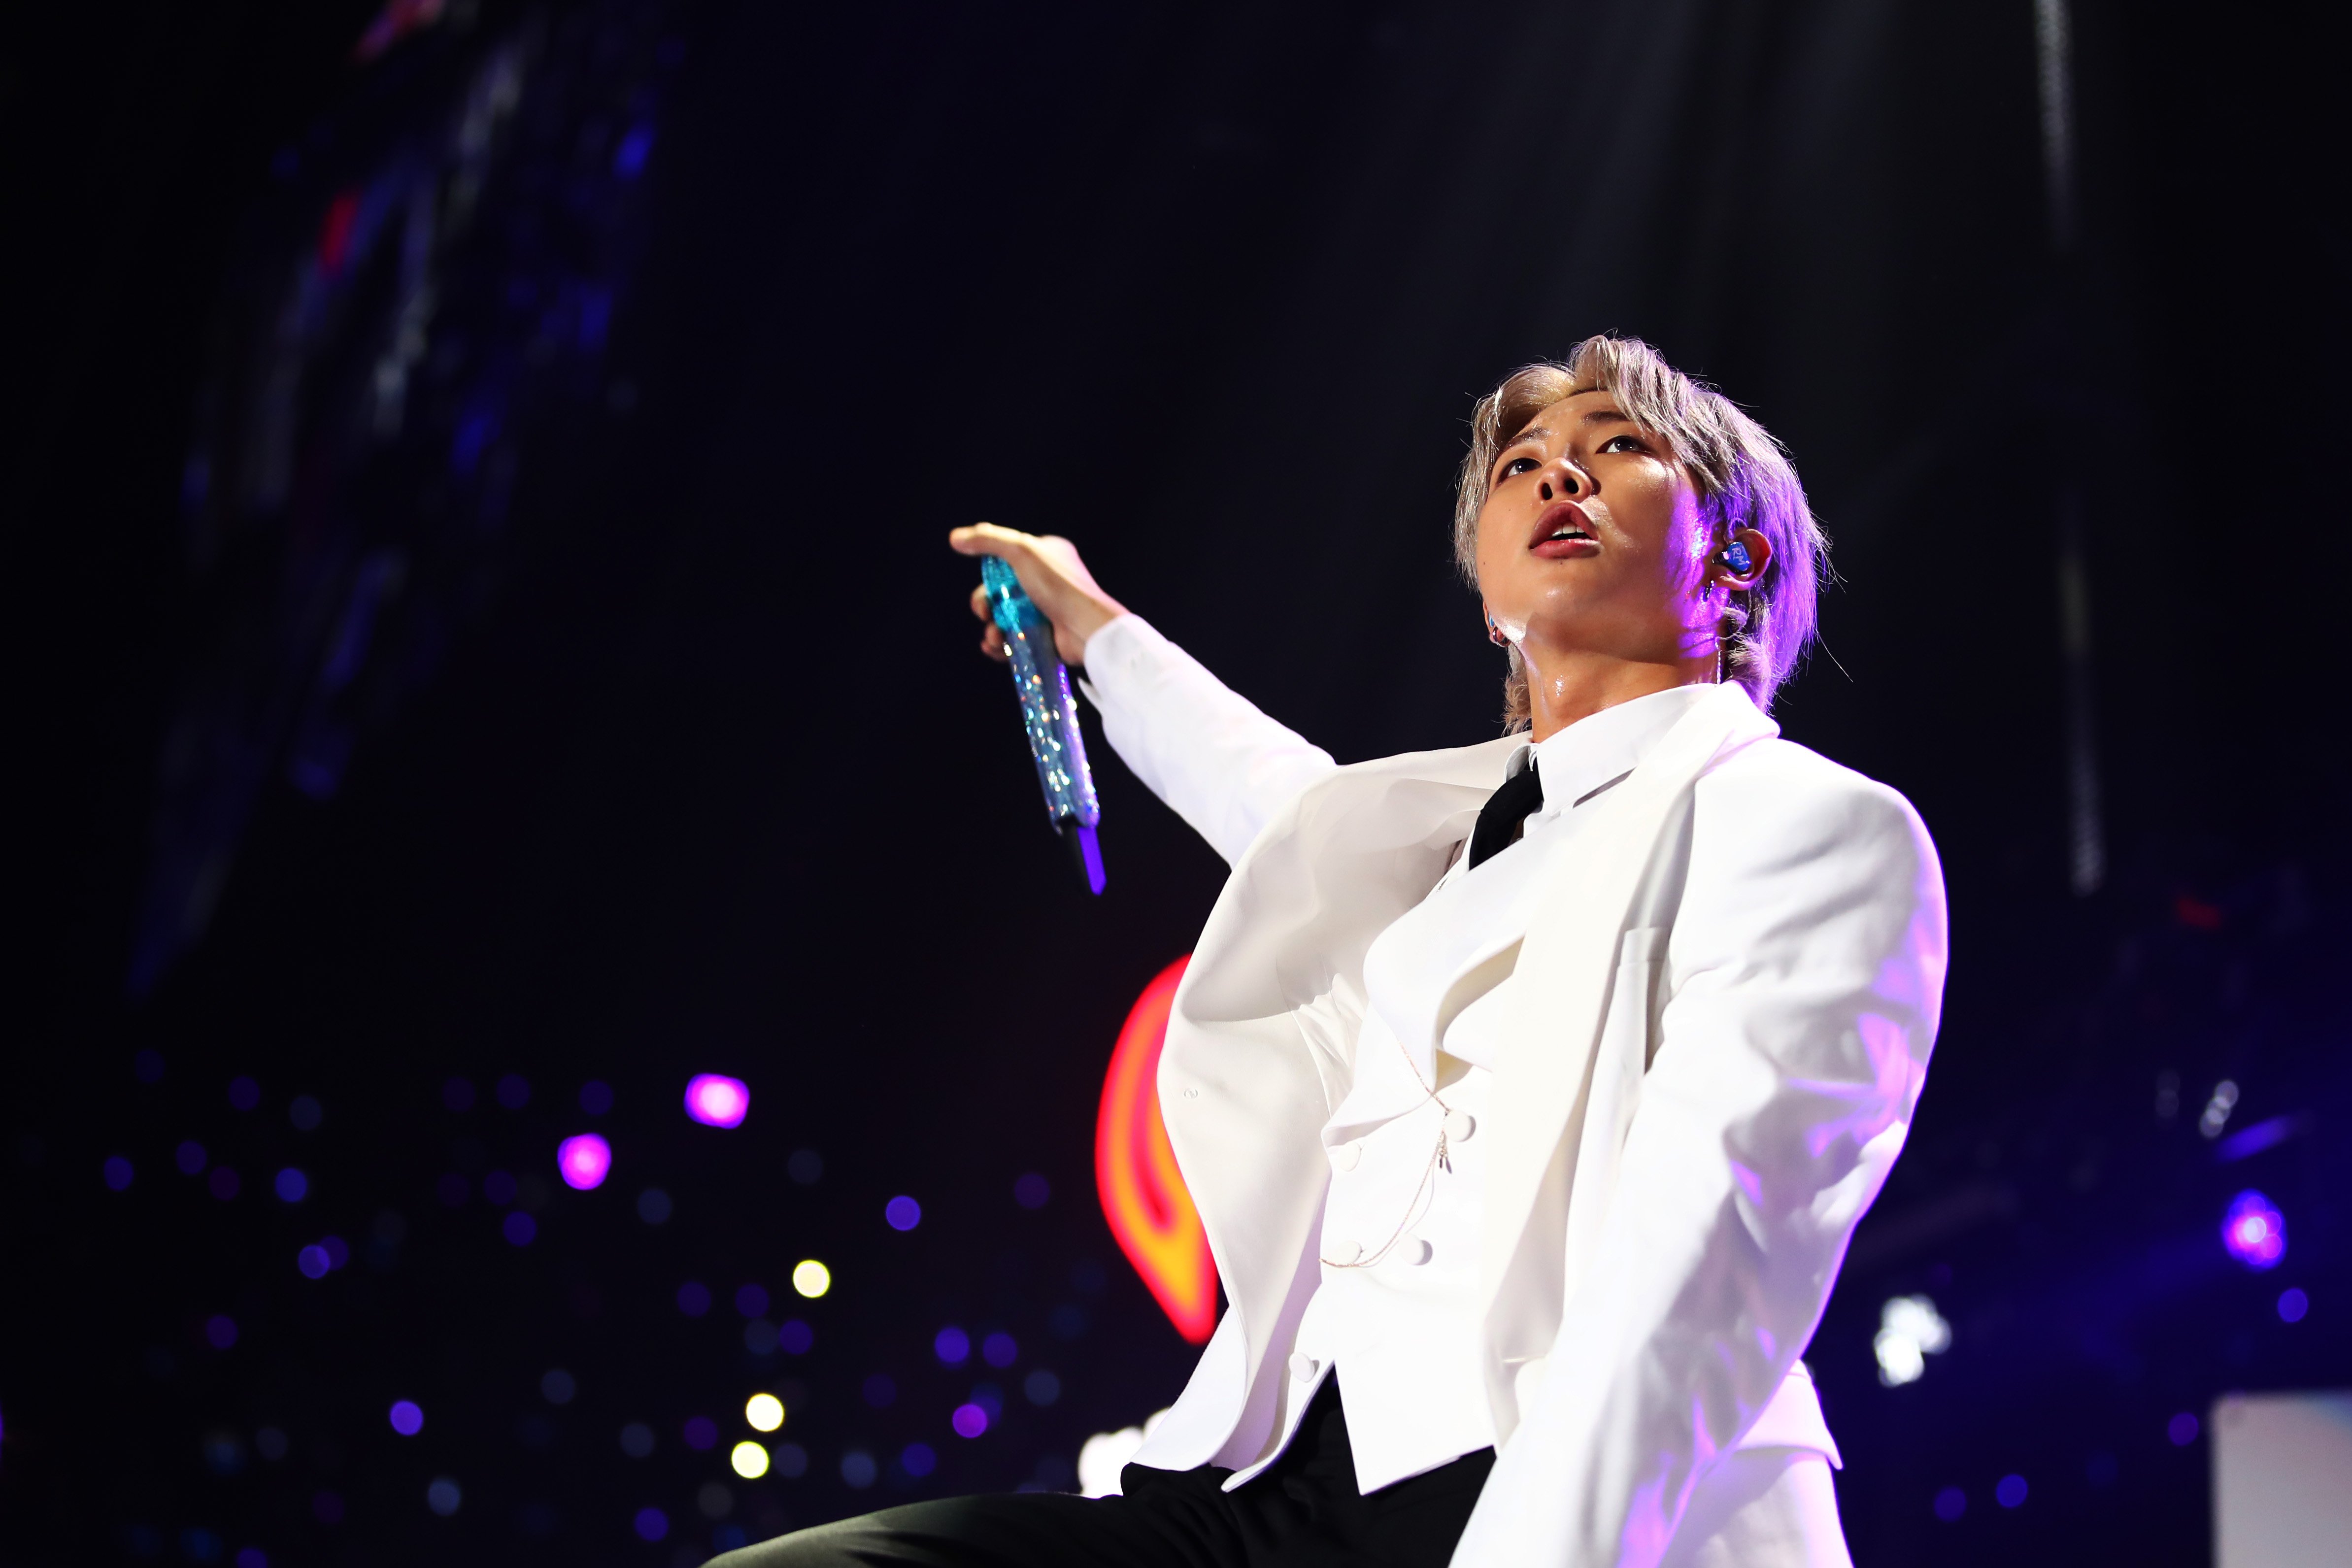 RM of BTS onstage during 102.7 KIIS FM's Jingle Ball 2019